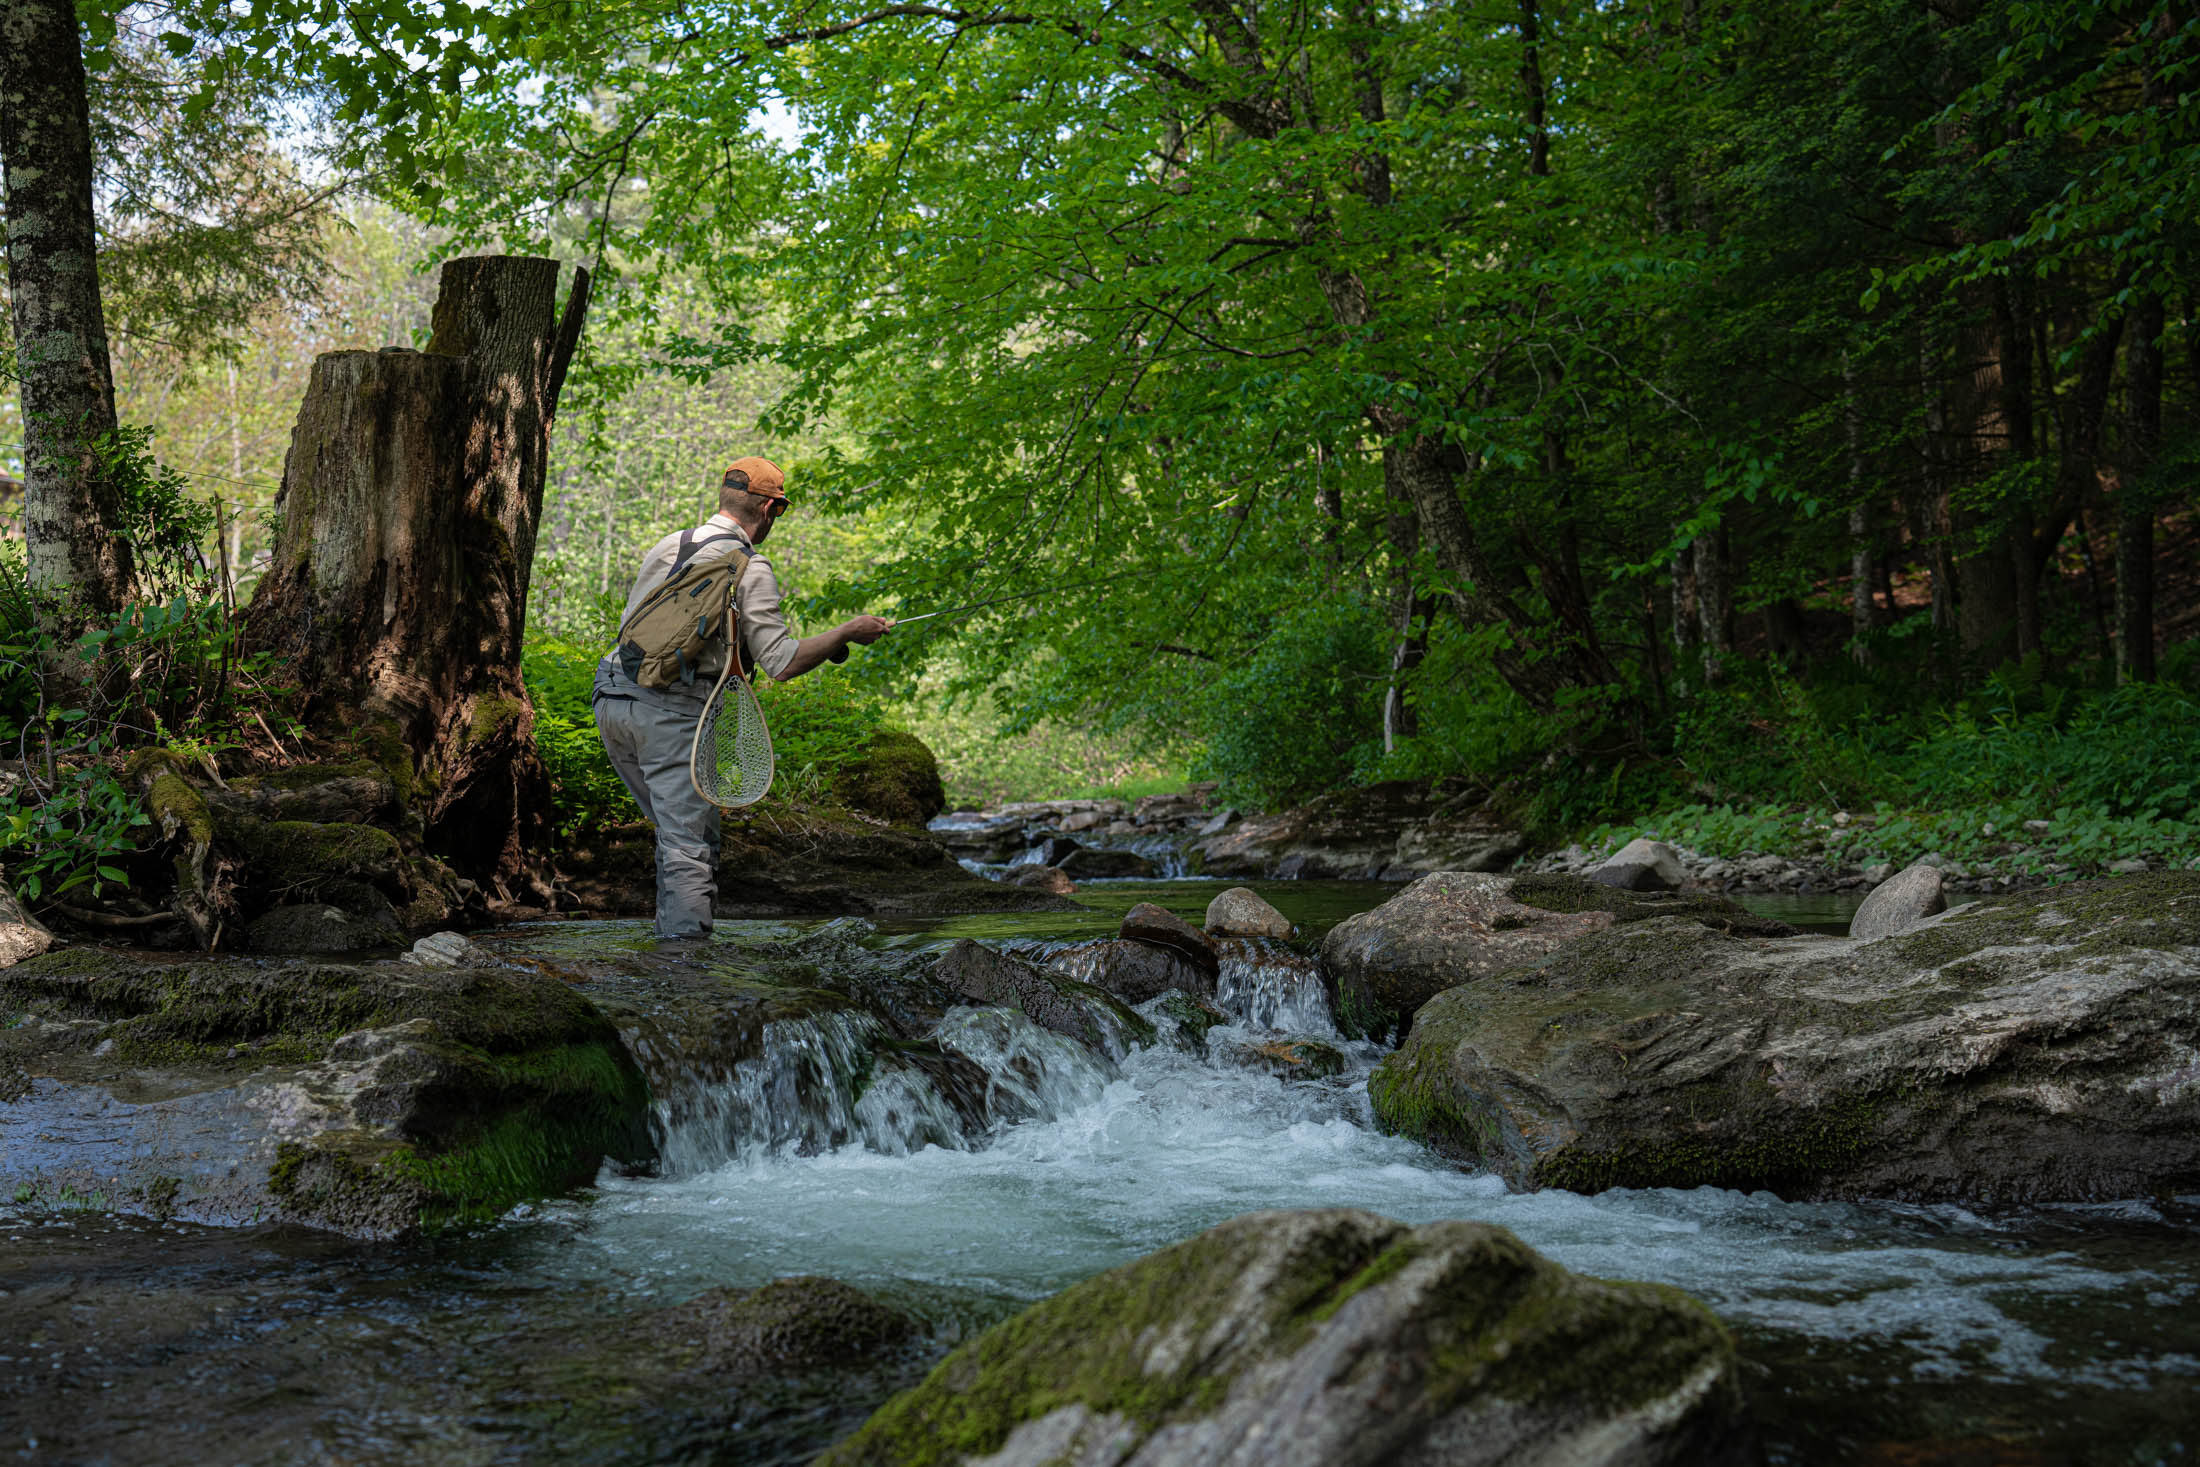 Orvis Helios 4 Fly Rod Review: New $1,200 Hack to Becoming a Better  Fisherman - Bloomberg